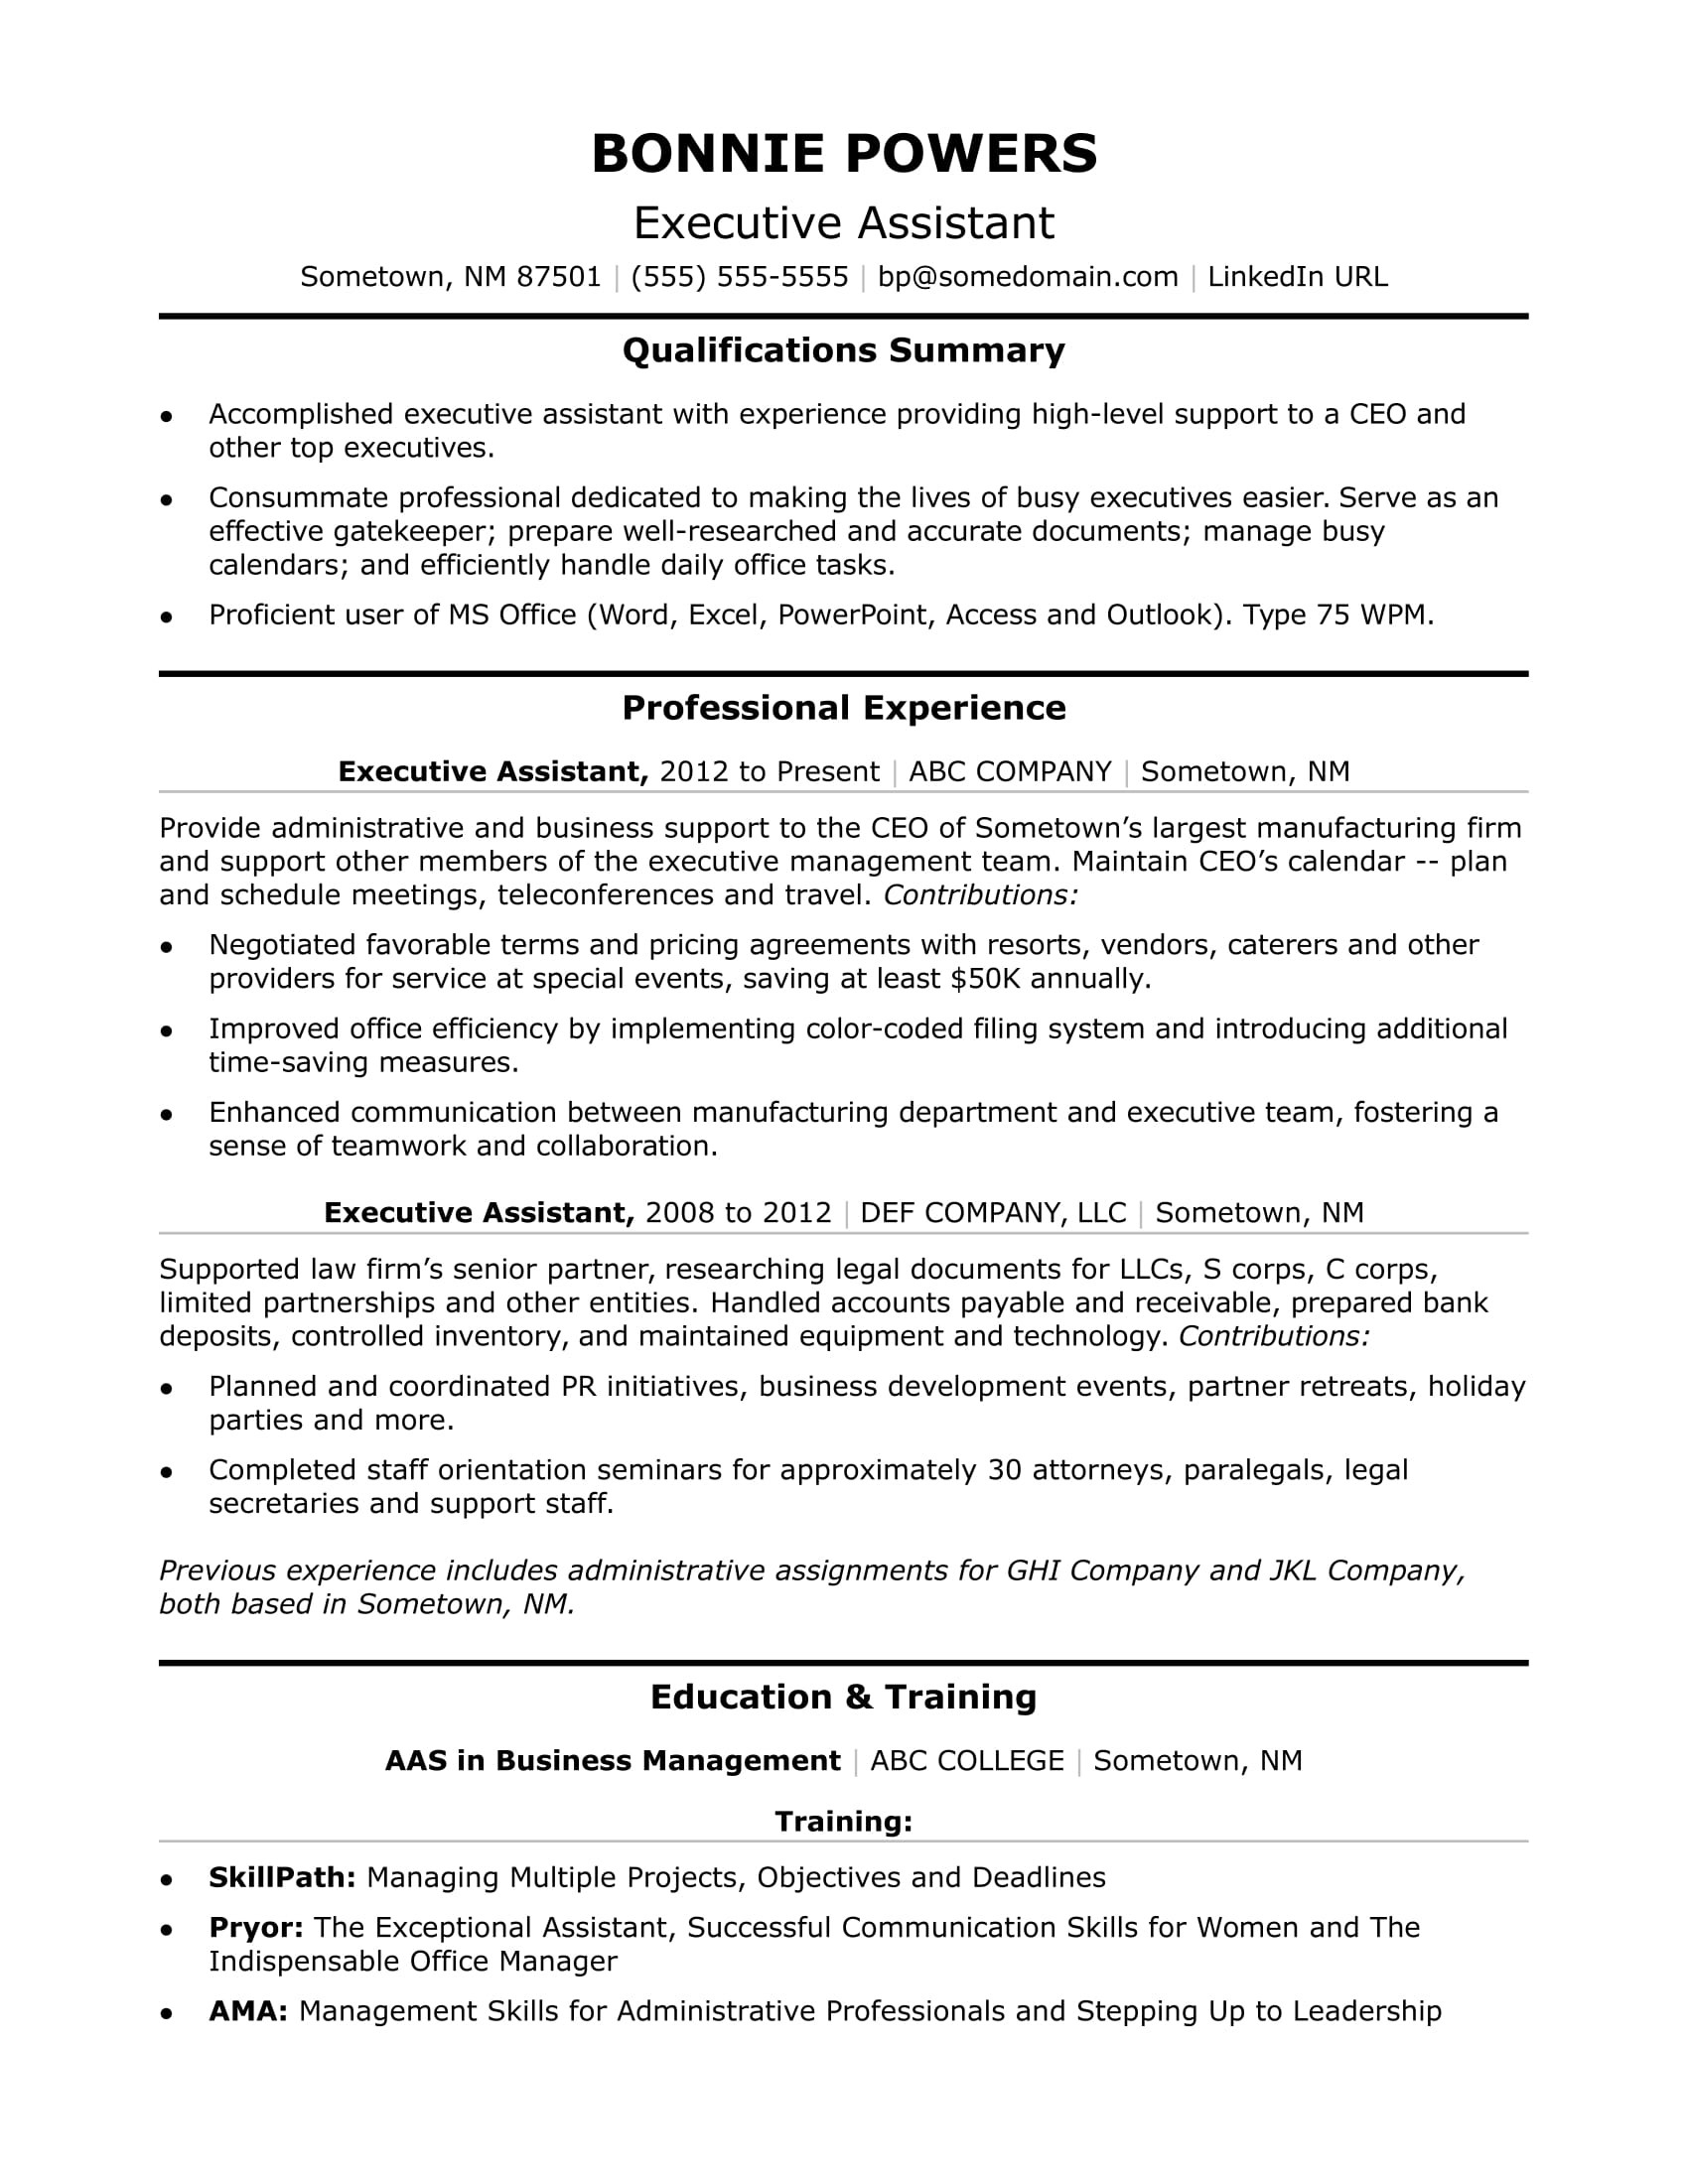 Sample Of Good Administrative assistant Resume Executive assistant Resume Monster.com